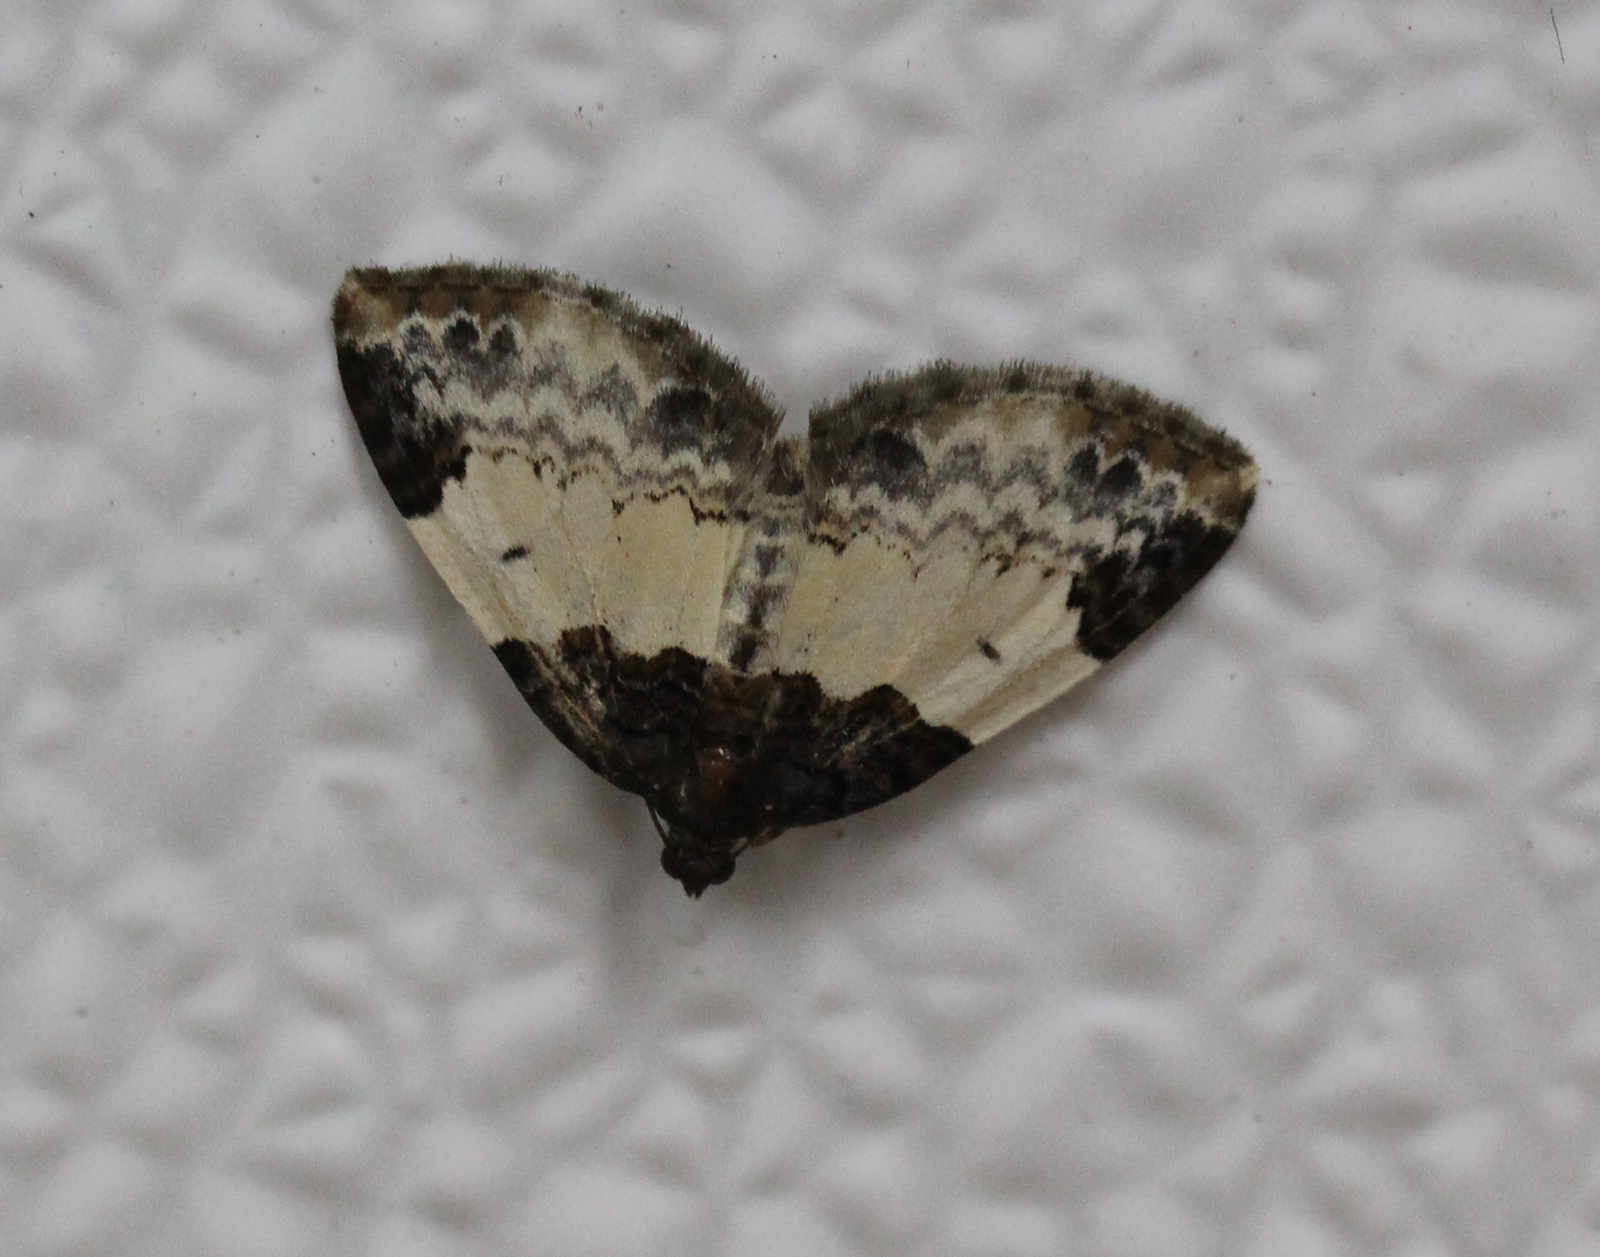 Sharply patterned moth on plastic surface